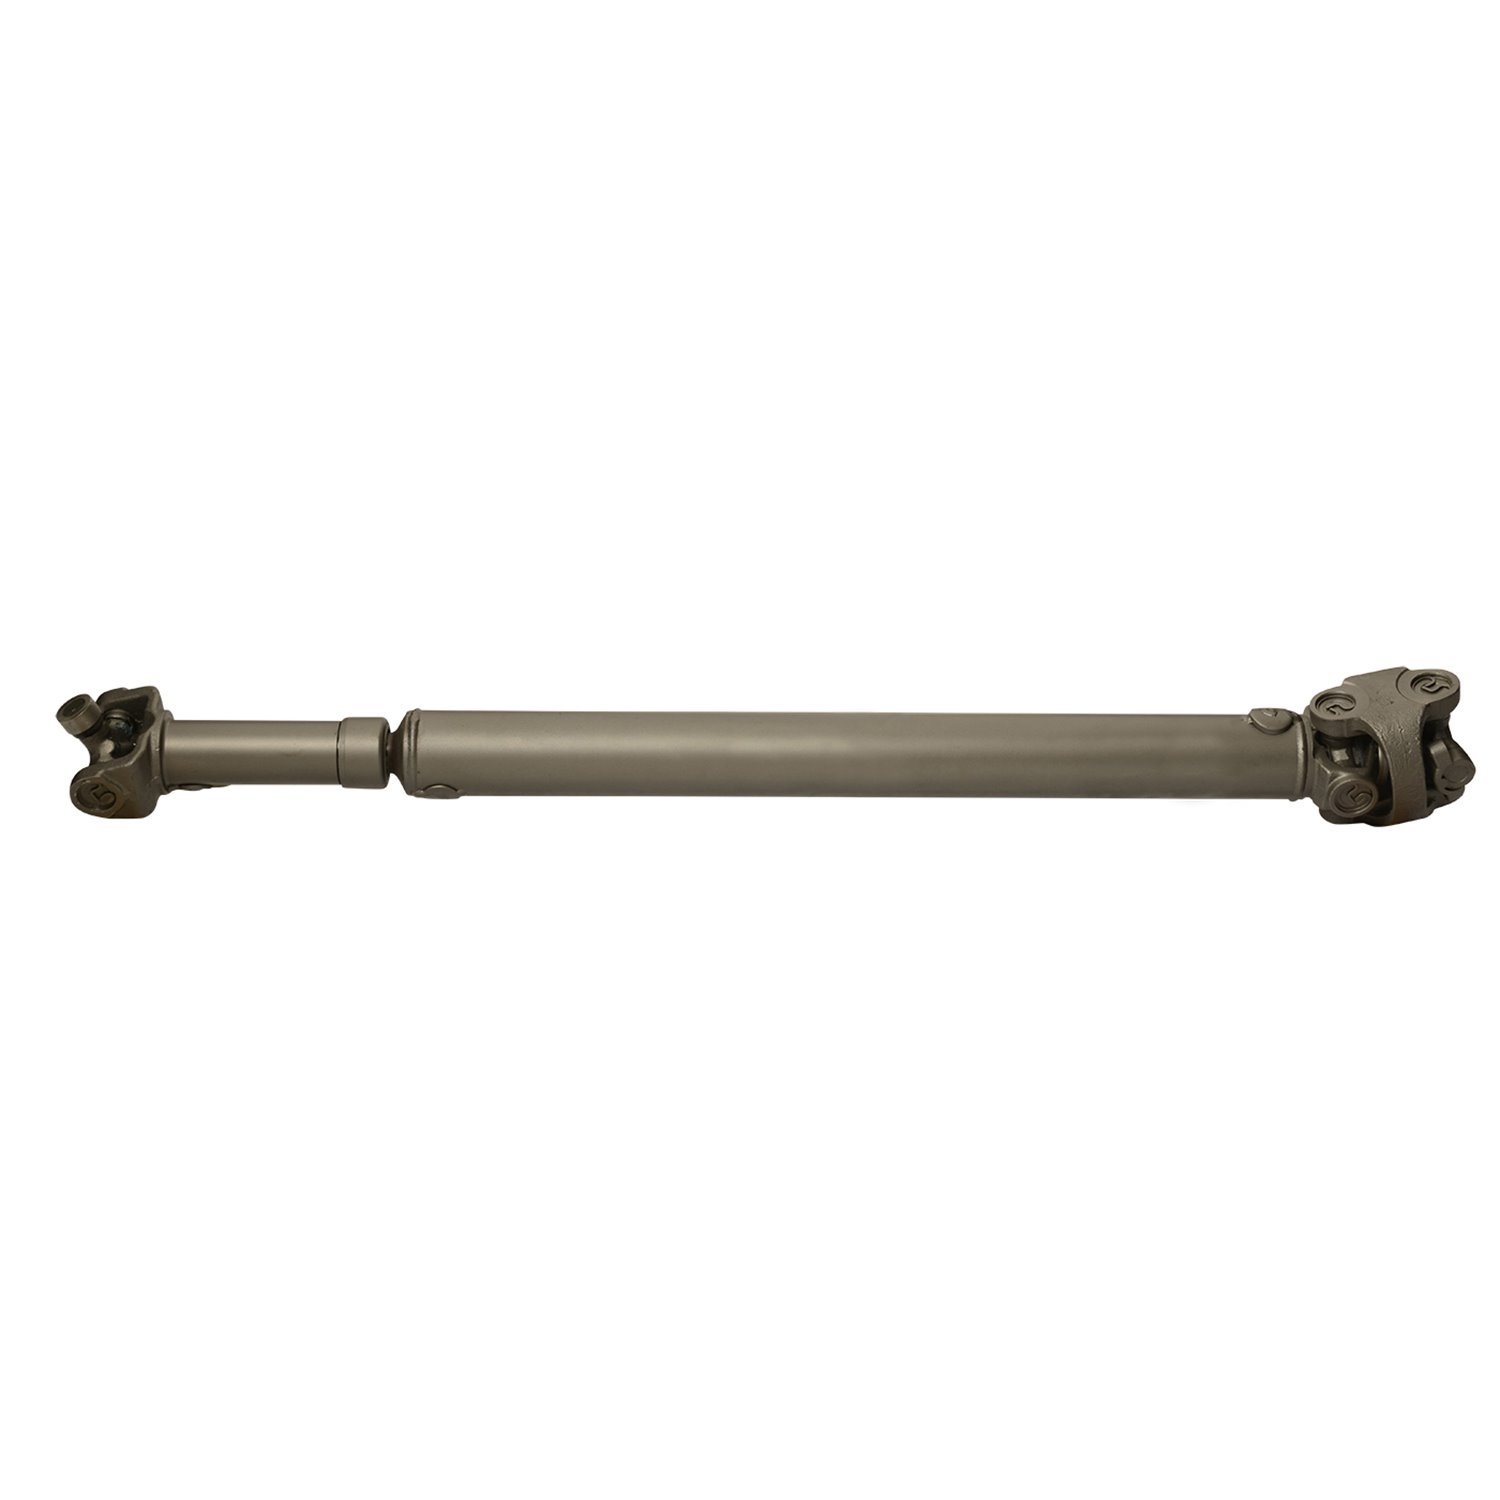 USA Standard ZDS9162 Rear Driveshaft, For Bronco, 37-5/16 in. Center-To-Center